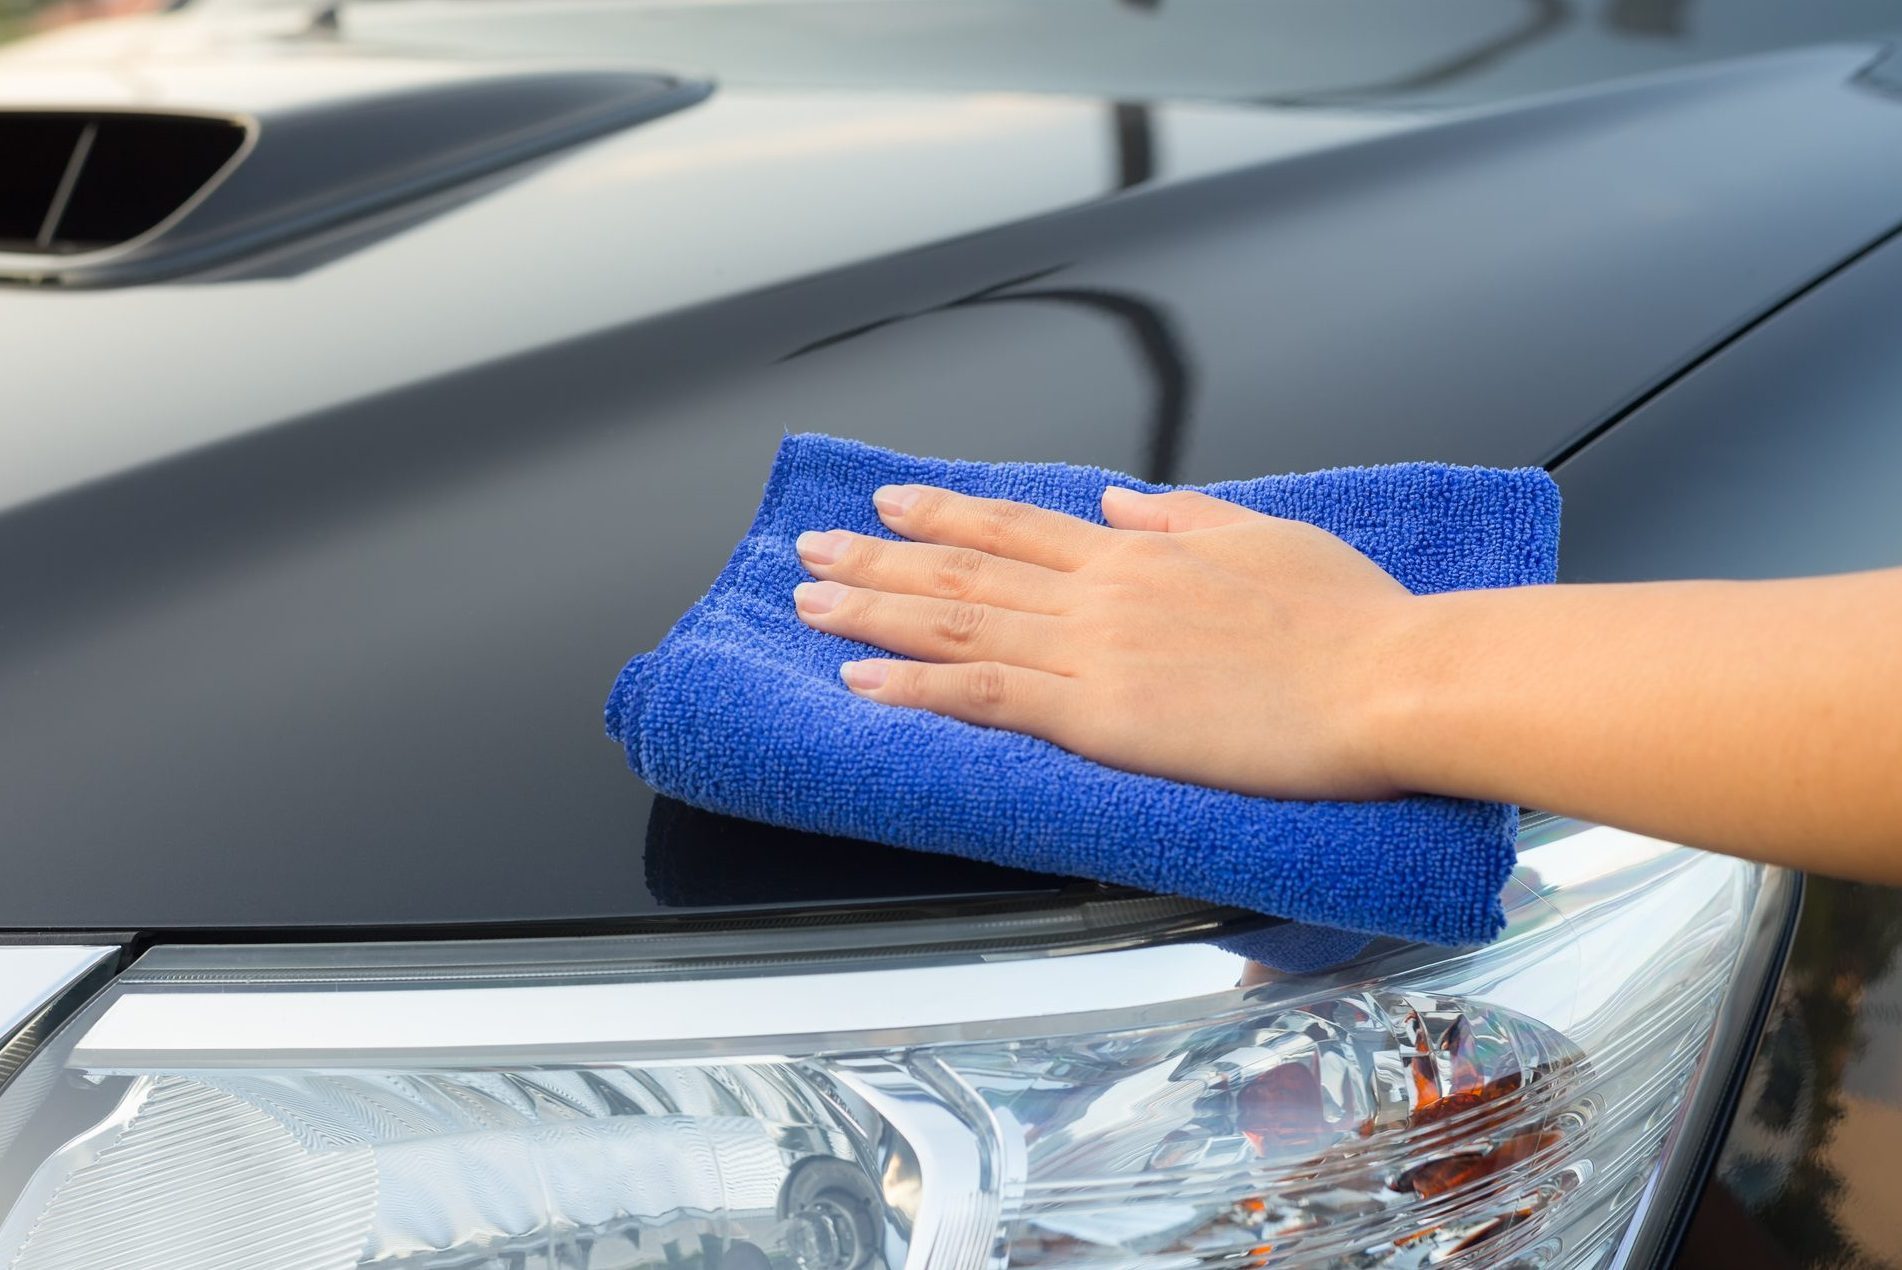 Best DRYING TOWEL for your CAR! How to dry your car fast and easy 